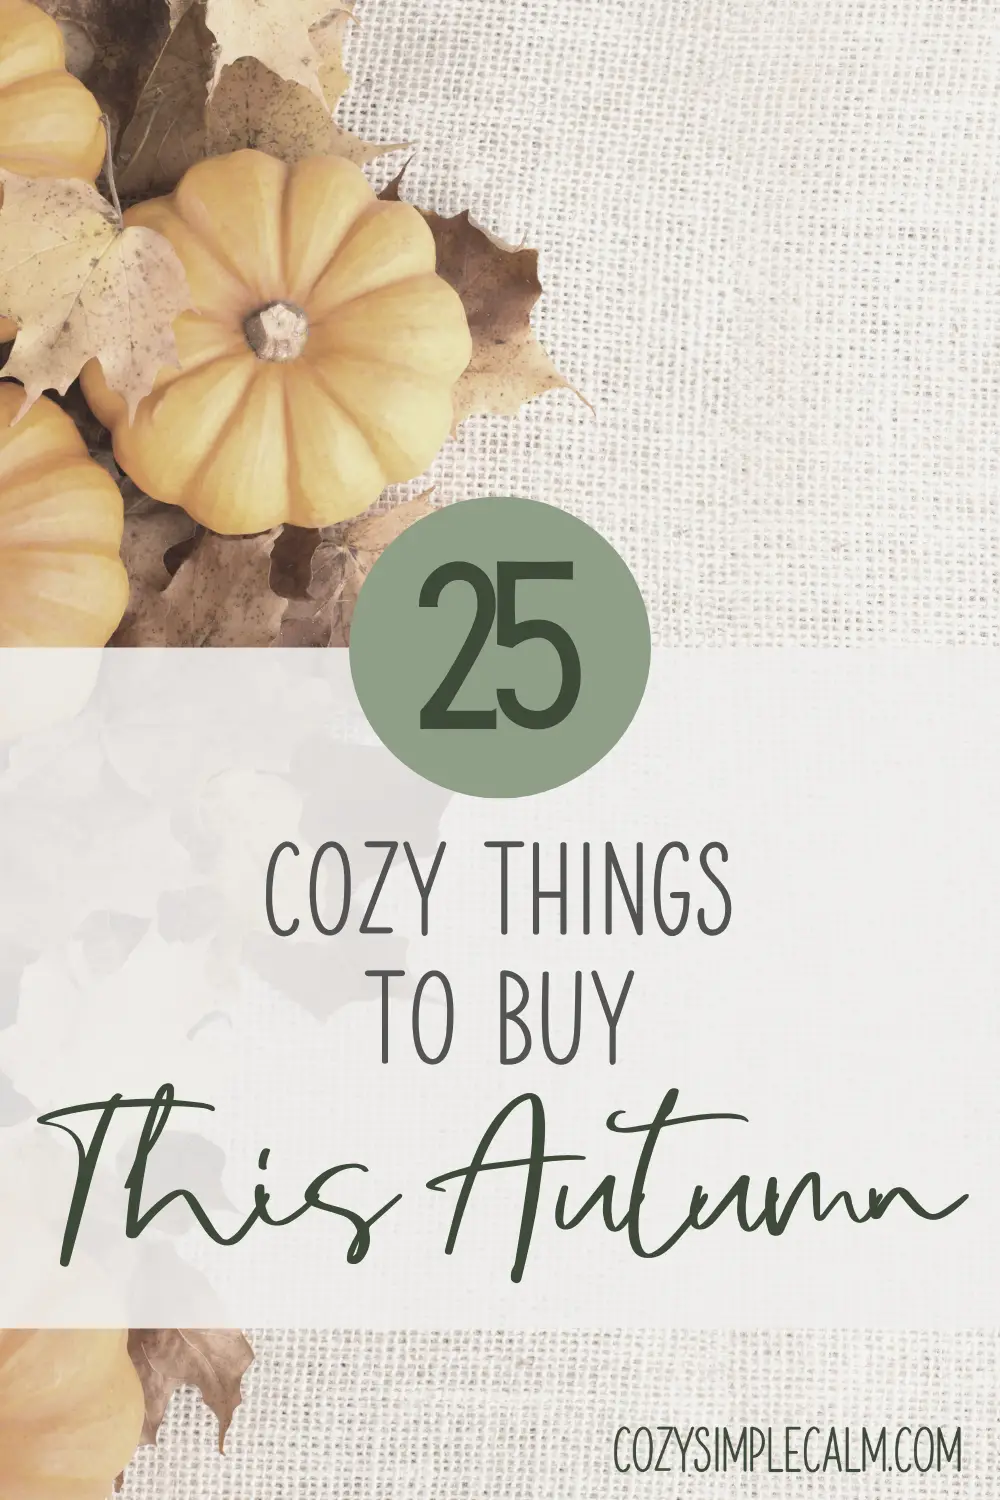 Image of pumpkins and leaves on neutral burlap background - Text overlay: 25 cozy things to buy this autumn - cozysimplecalm.com